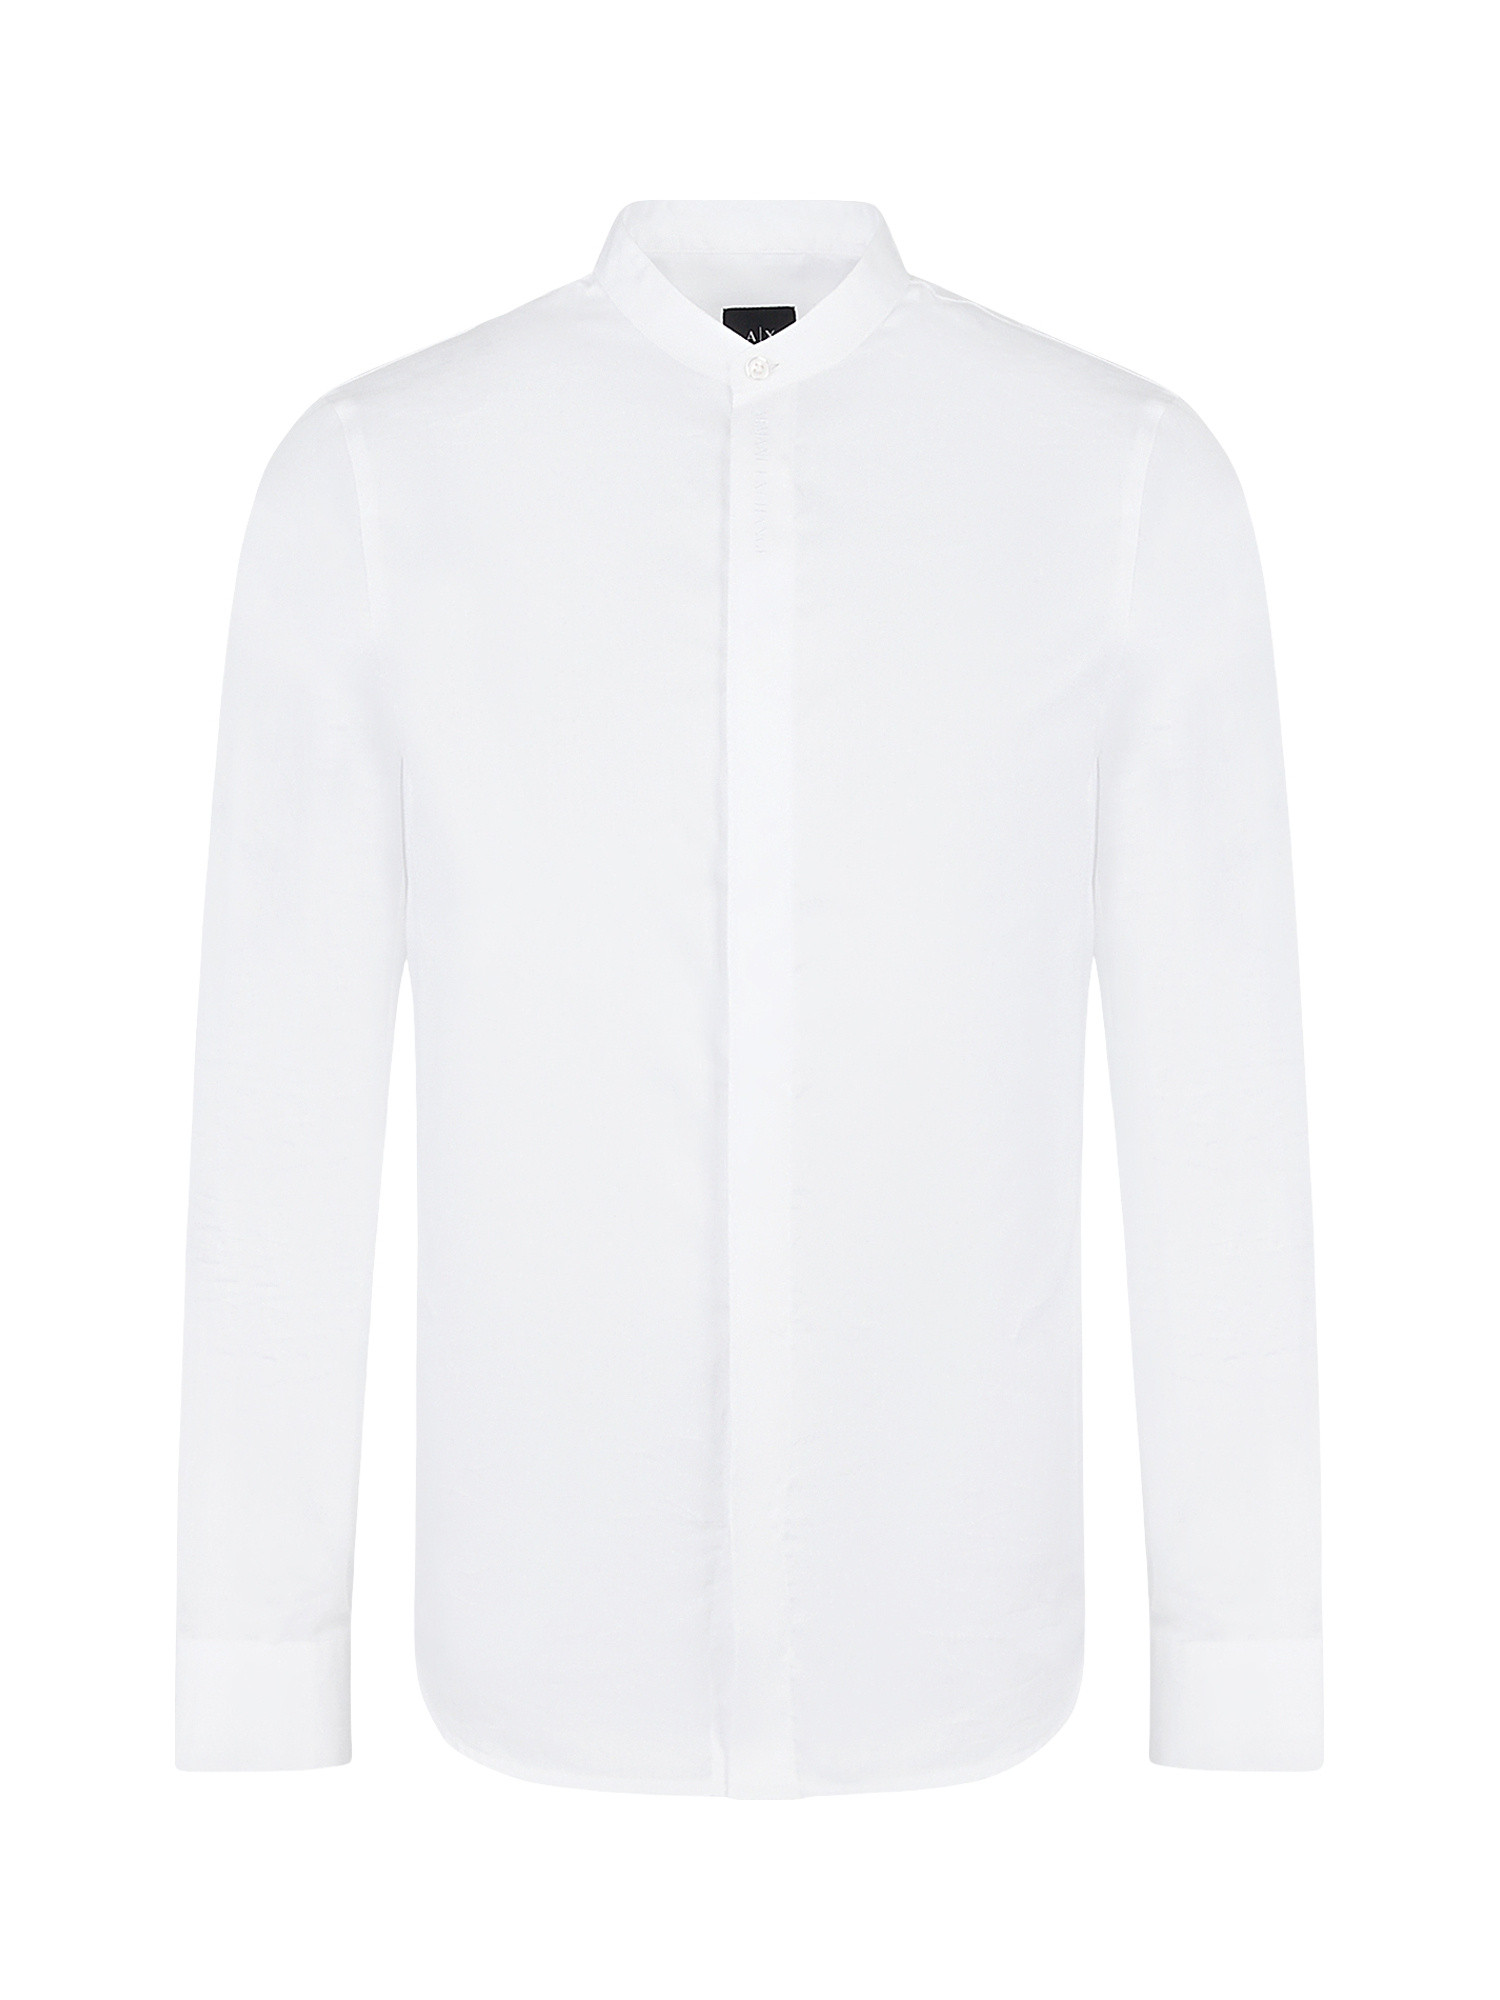 Armani Exchange - Camicia slim fit in cotone, Bianco, large image number 0